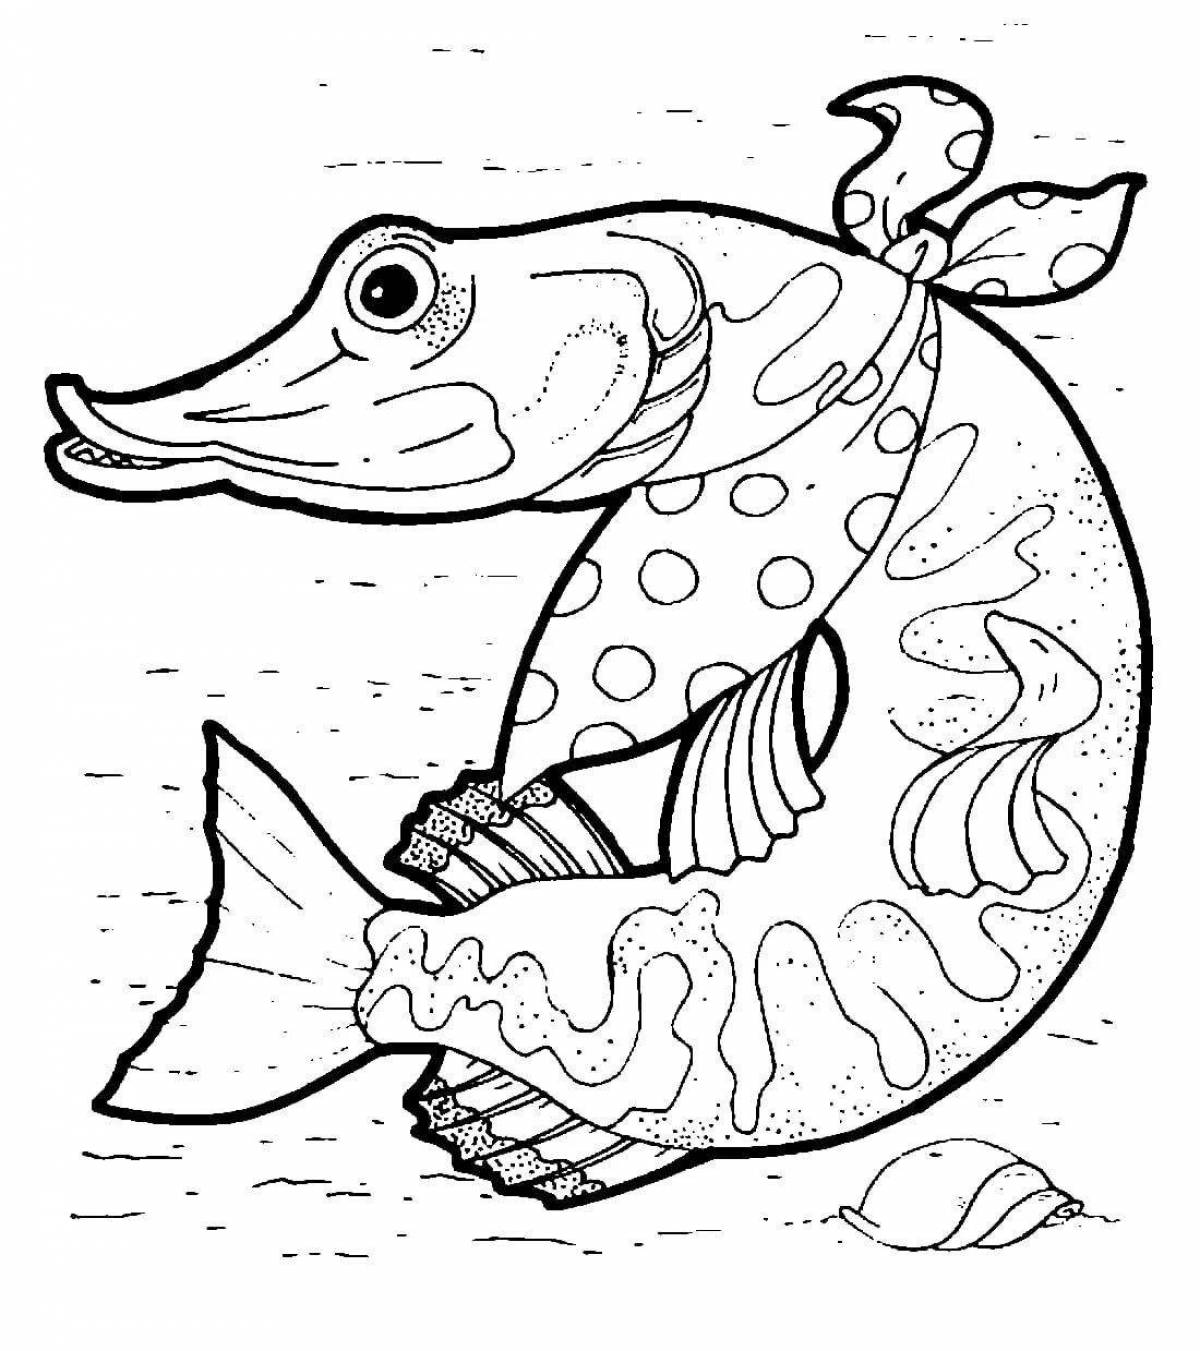 Great pike coloring book